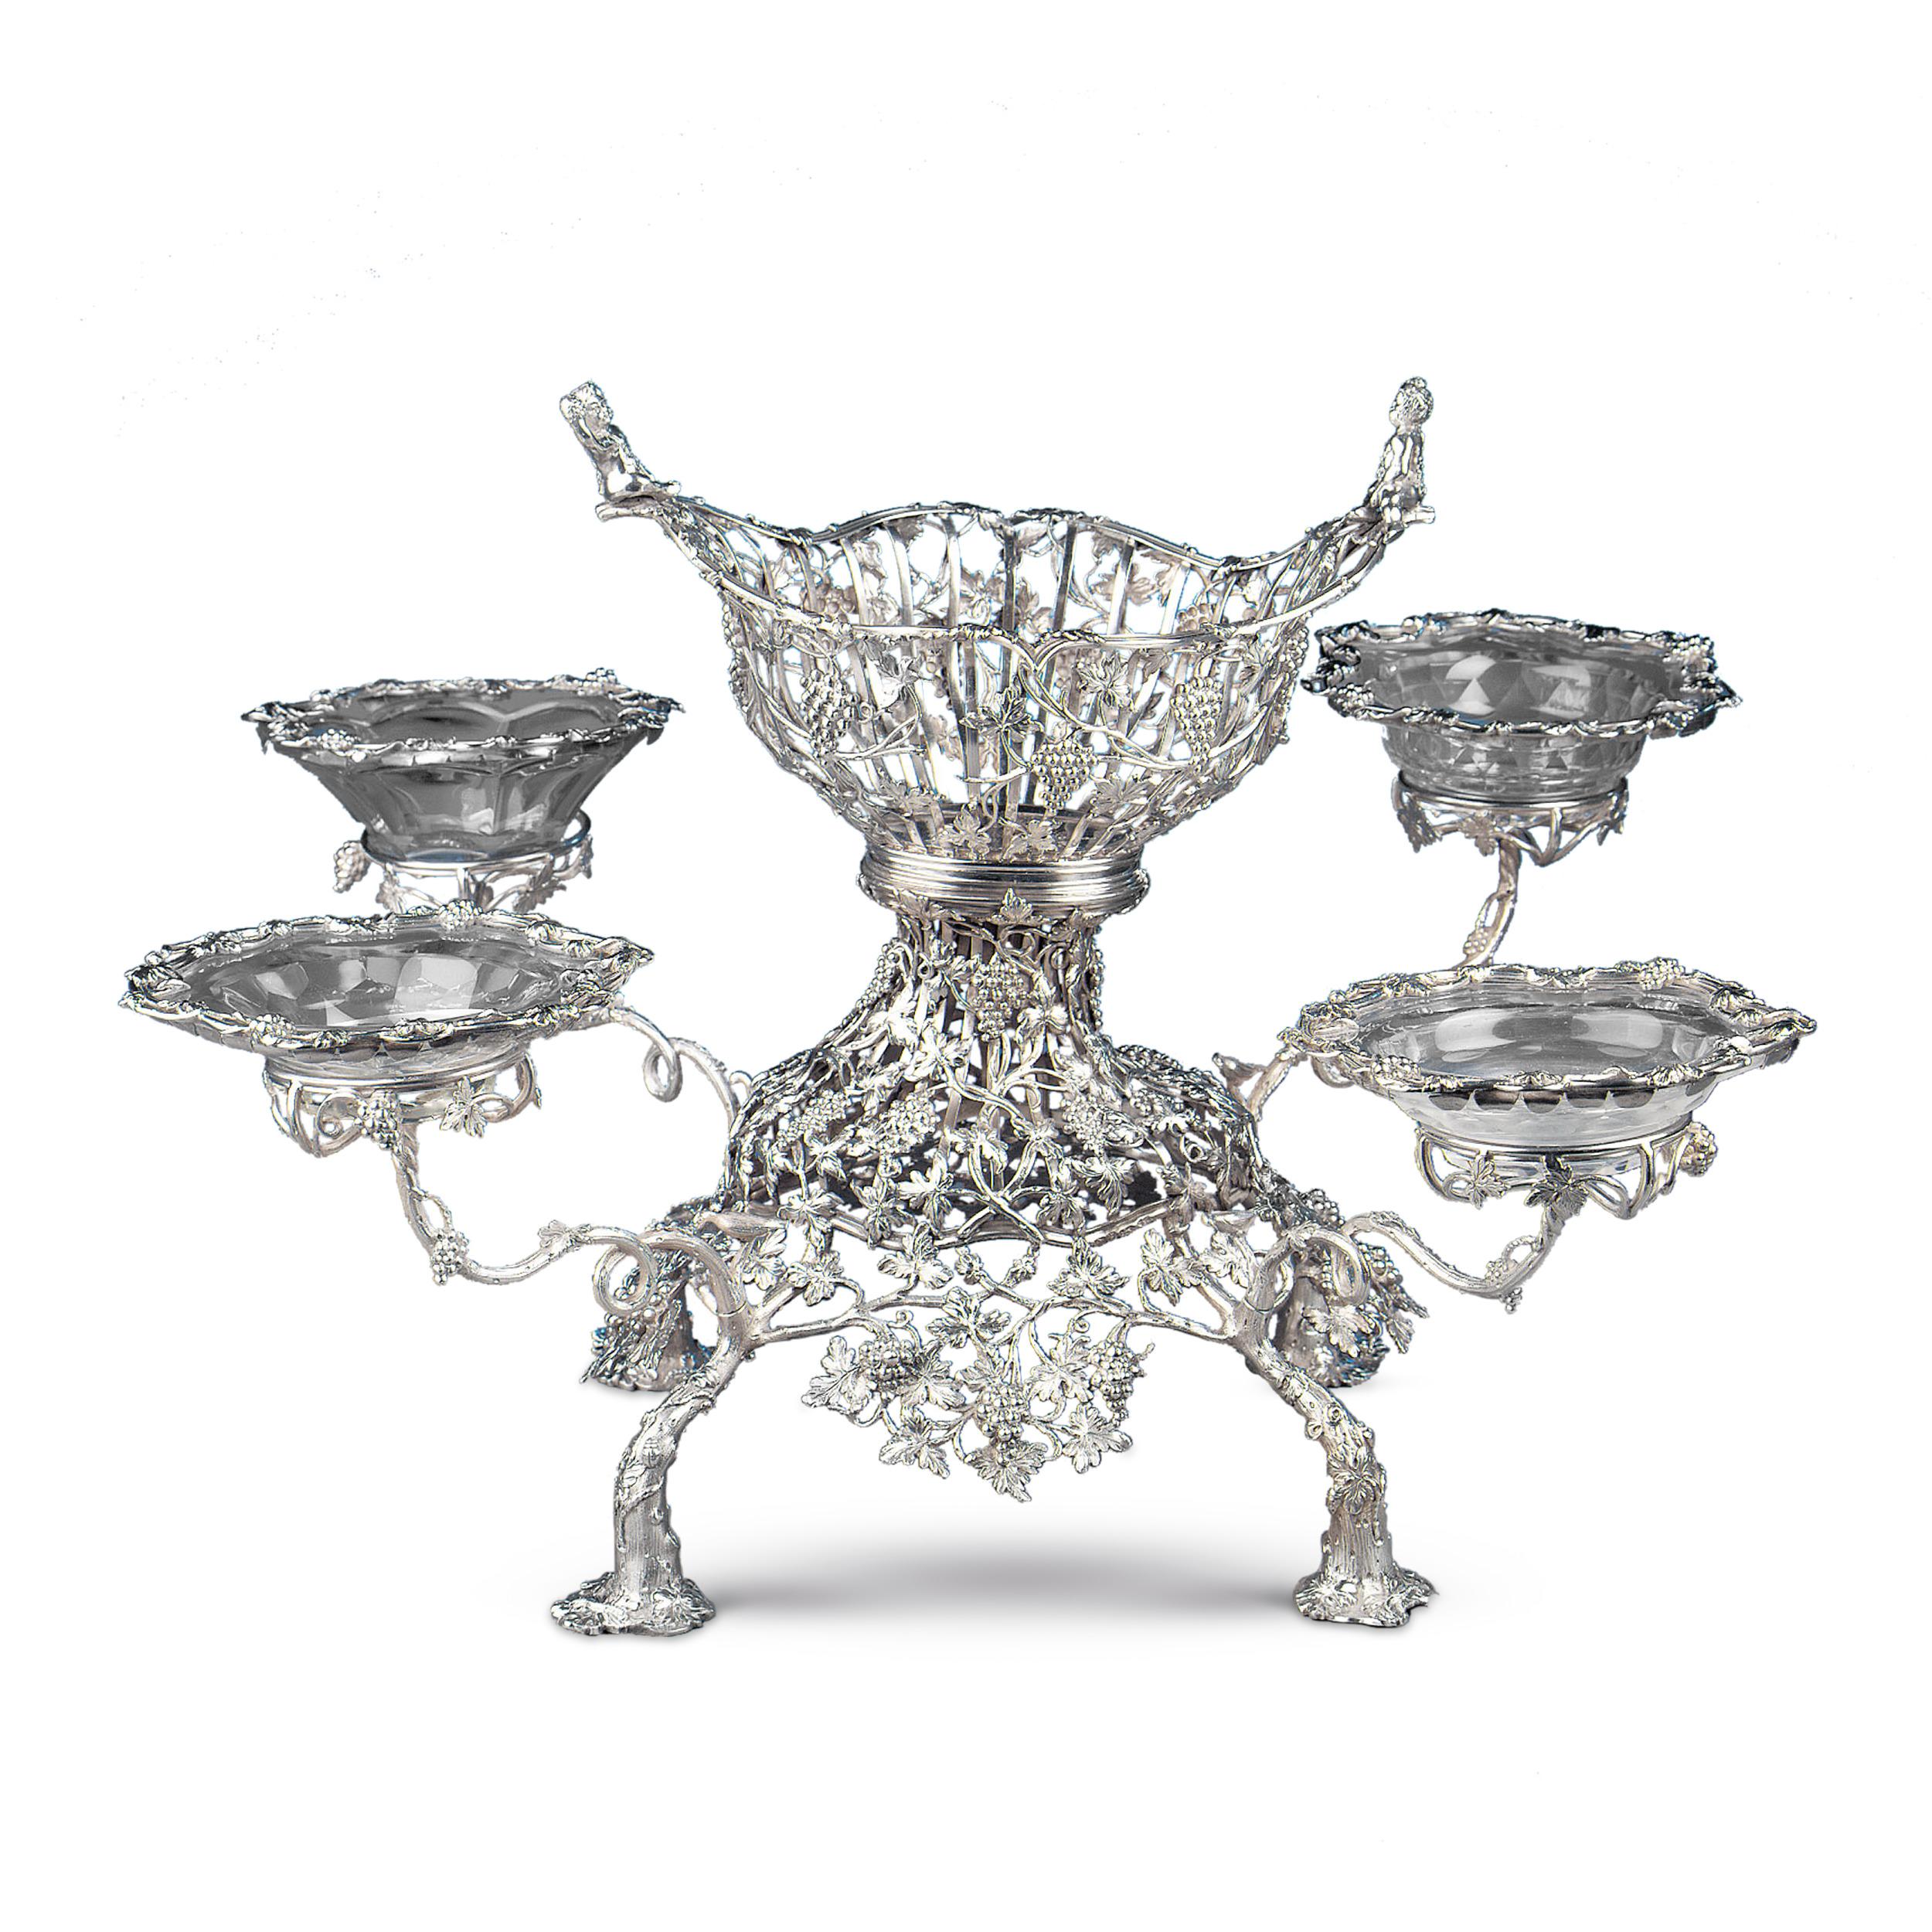 A remarkable Georgian sterling silver epergne by London silversmiths John Lawford and William Vincent. The entire epergne is beautifully embellished with fruits and vines, and the central basket is surmounted by two delightful cherubs. The four